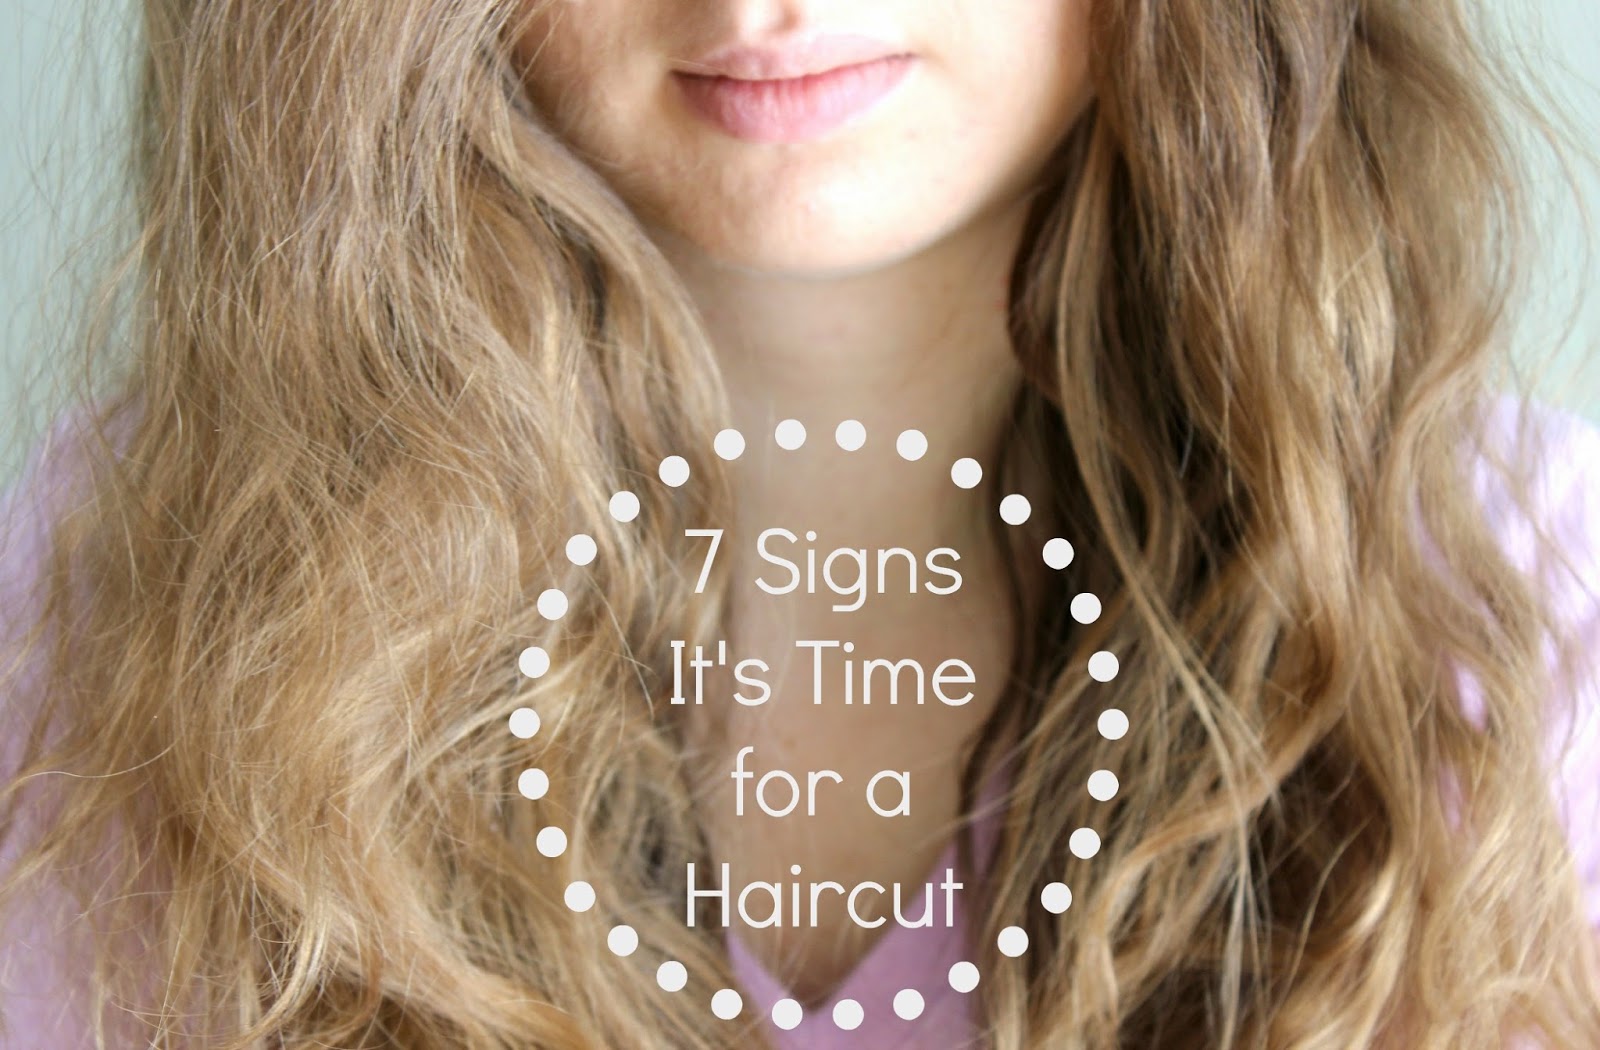 7 Signs It's Time for a Haircut + My Before and After Pics | Natalie Loves  Beauty